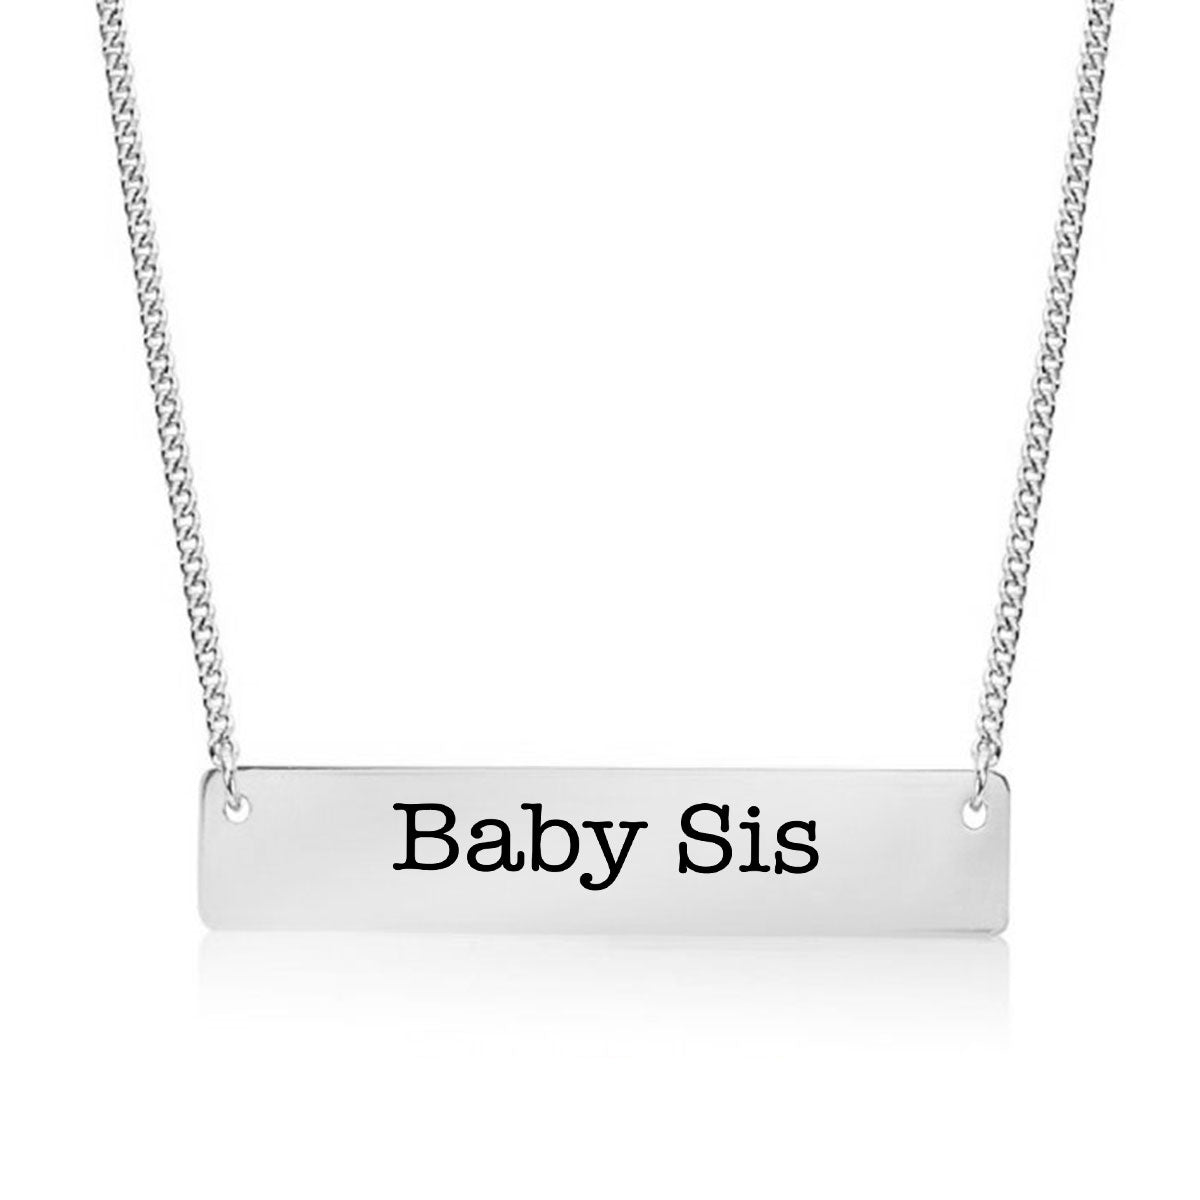 Silver Baby Sis Bar Necklace